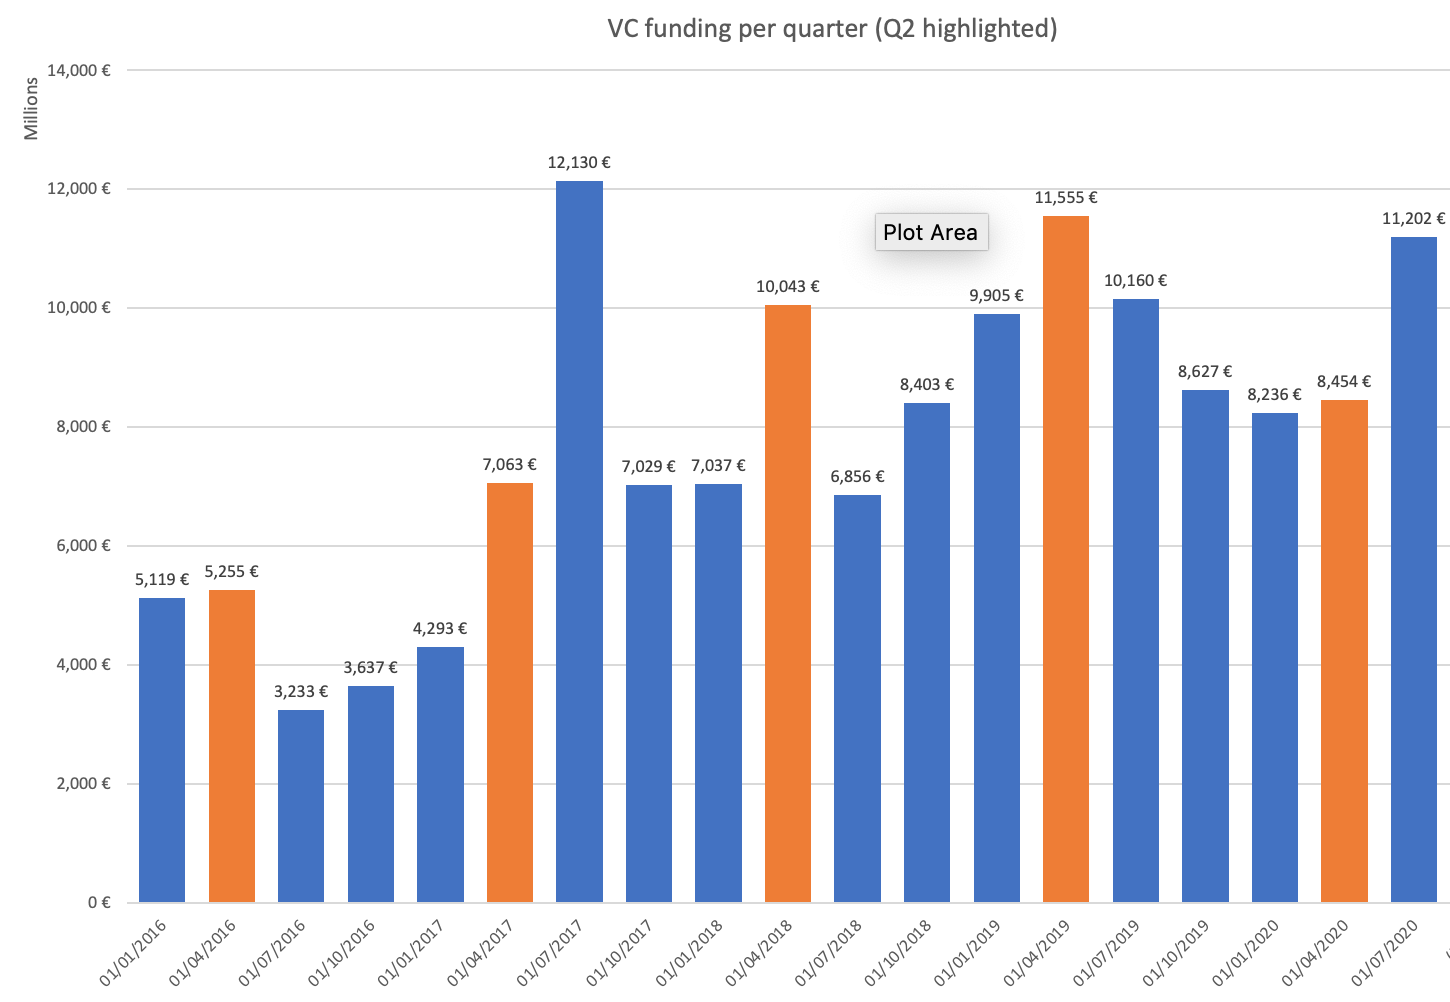 VC funding in Europe per quarter Q2 highlighted